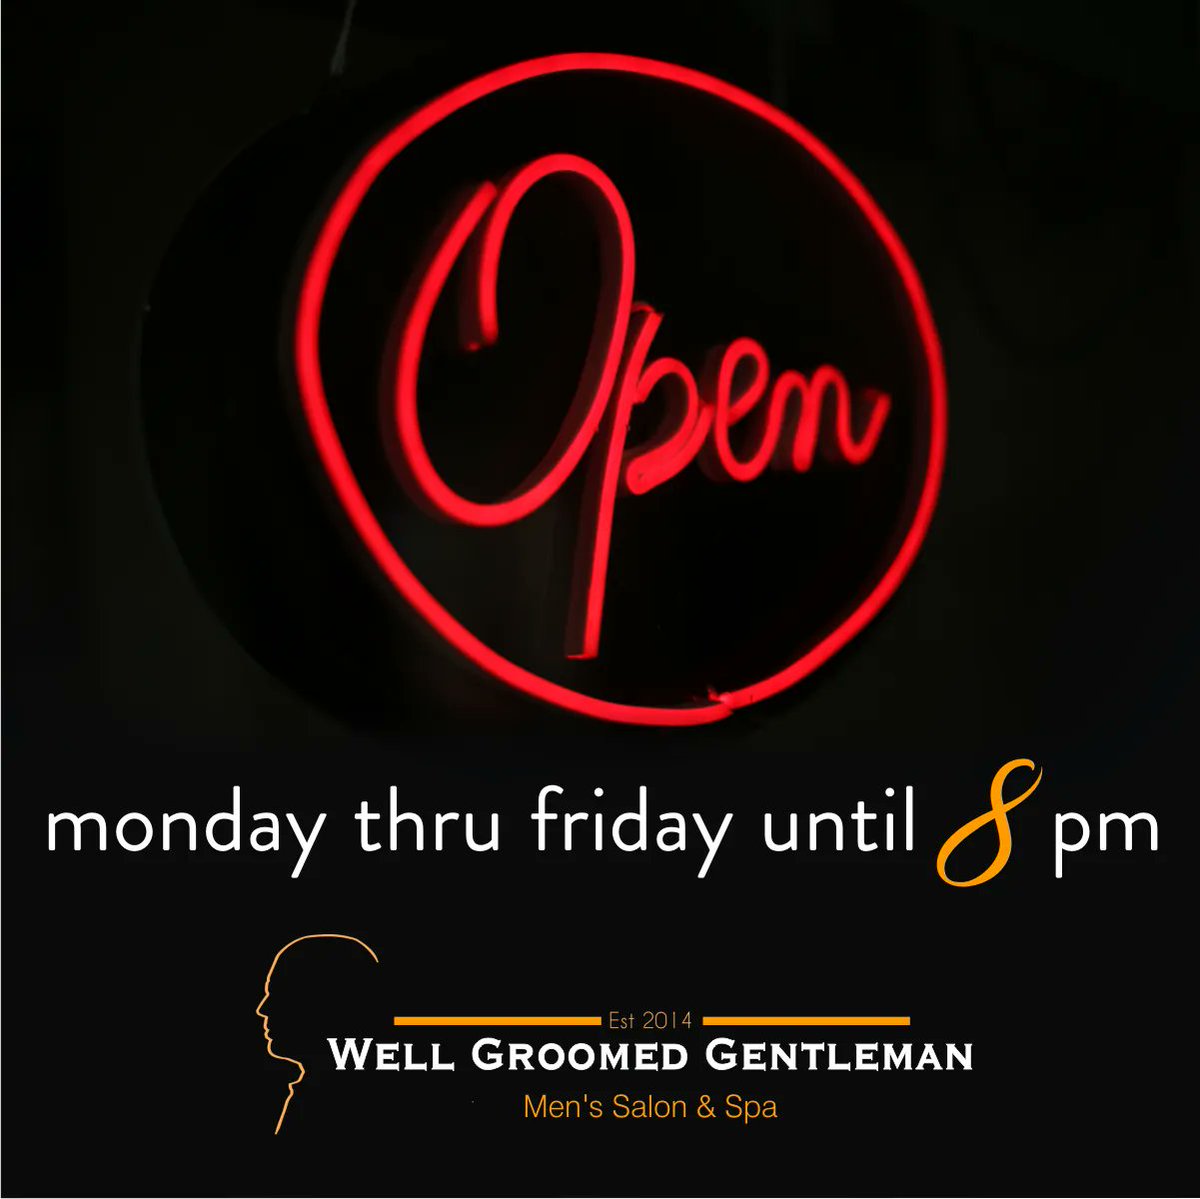 Just a reminder that we are open 8-to-8 #MondayToFriday, even during your #lunch hour. The #cafecito 🍵 is on us! #lookgood #feelgood  
.
Schedule your appointment at
☎️ 786.362.6360
WellGroomedGentleman.com
.
#wellgroomedgentleman #lookgoodfeelgood #handsome #miami #coralgables